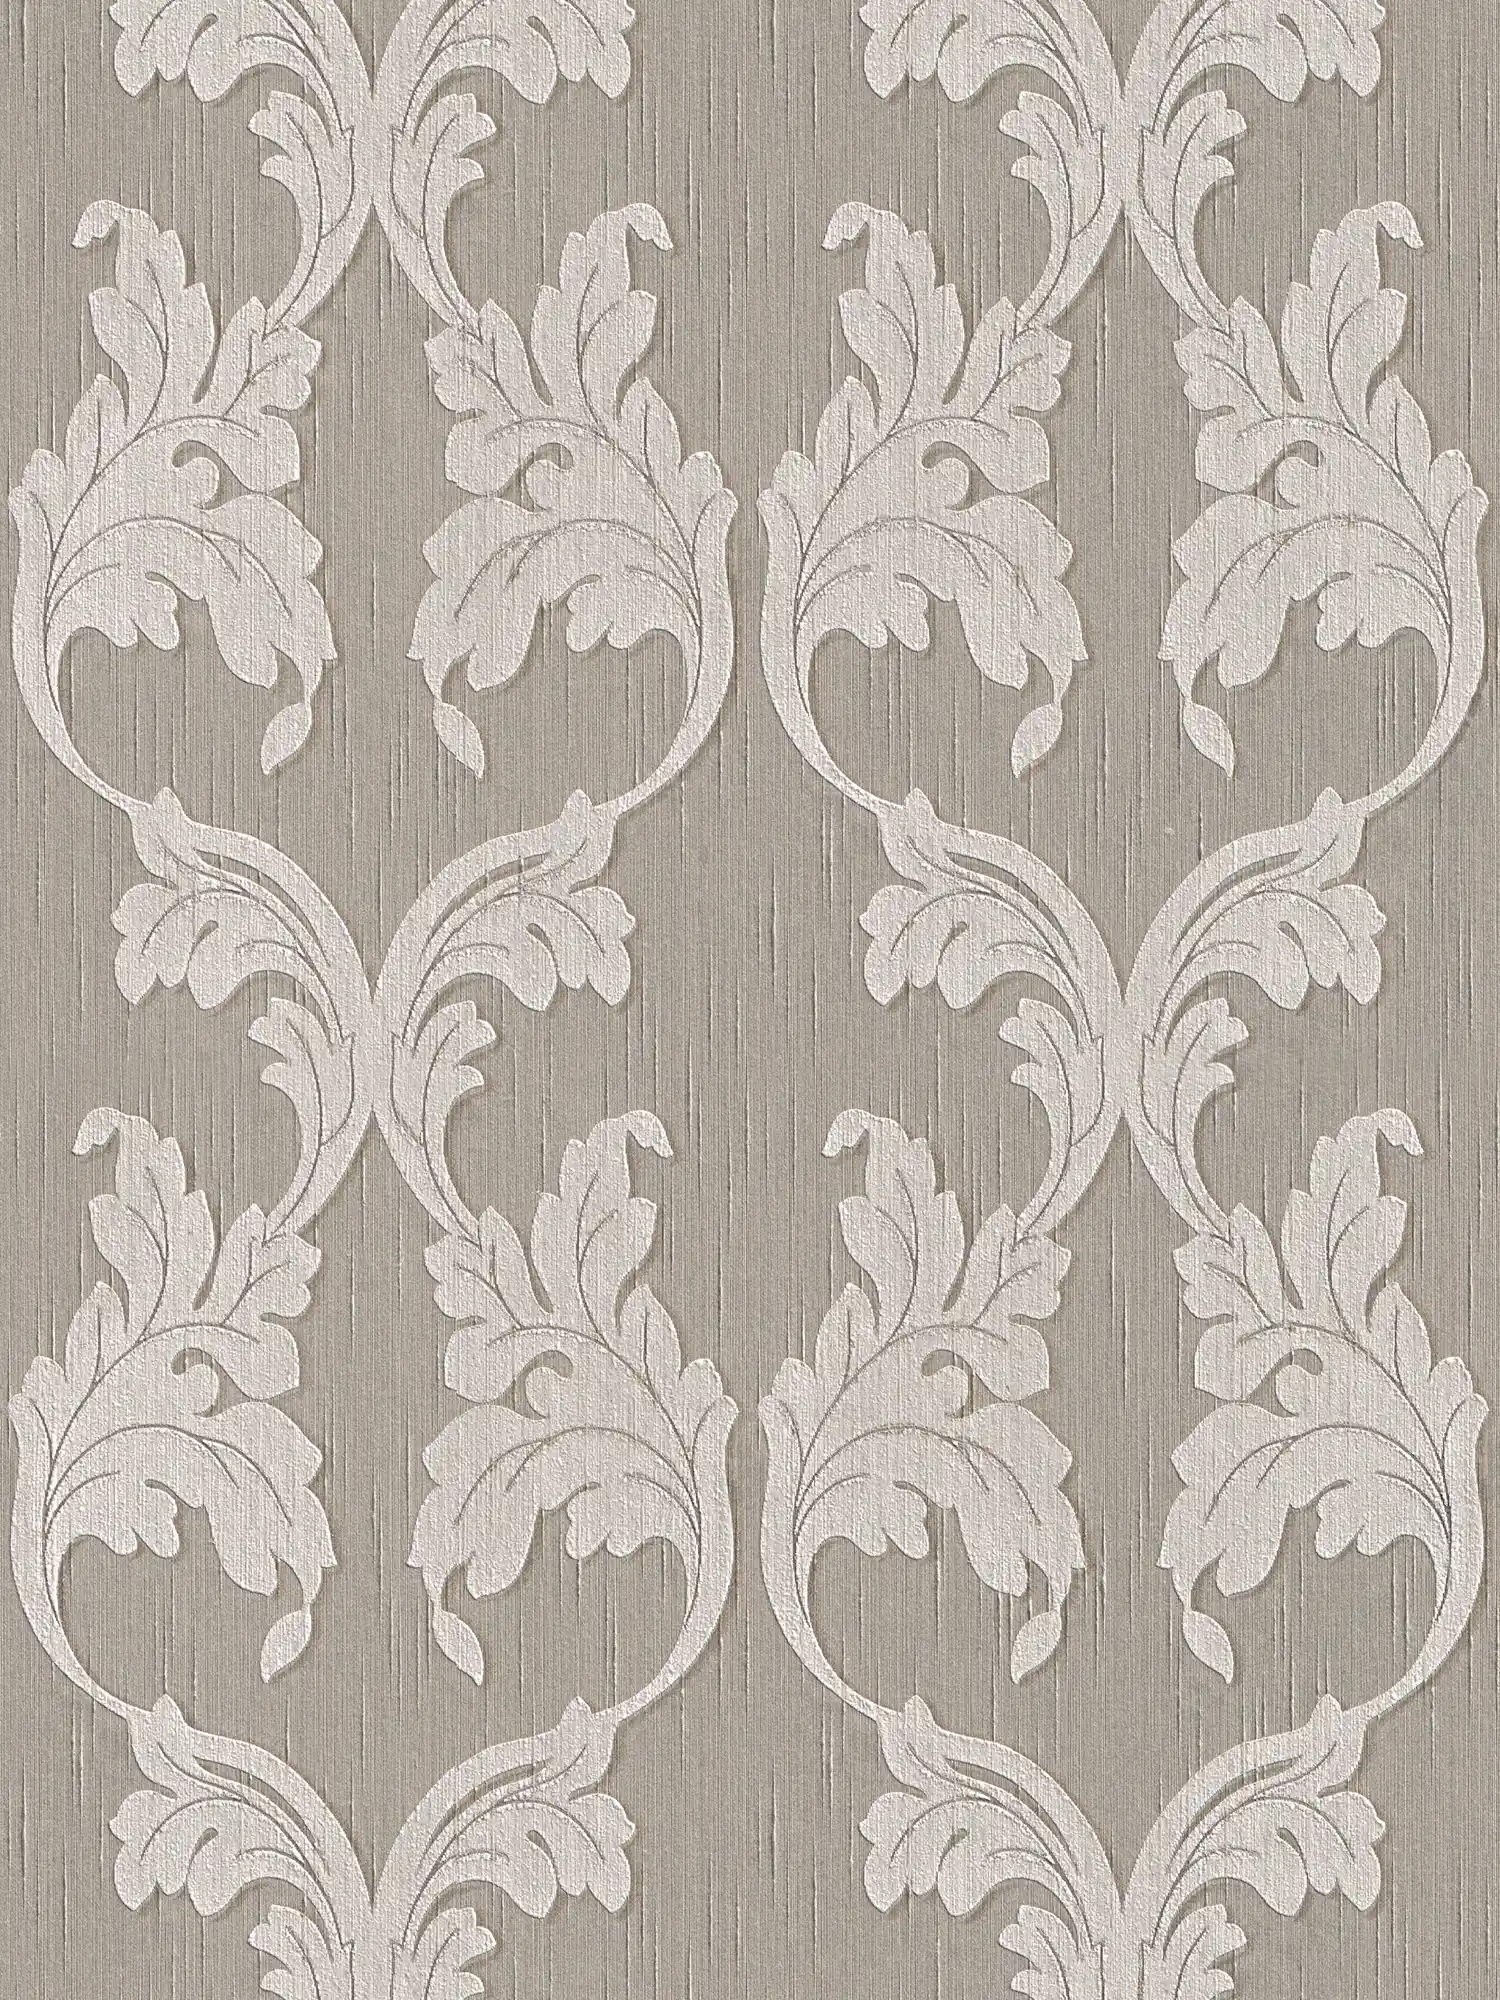 Baroque wallpaper with floral tendrils ornaments - grey, beige
